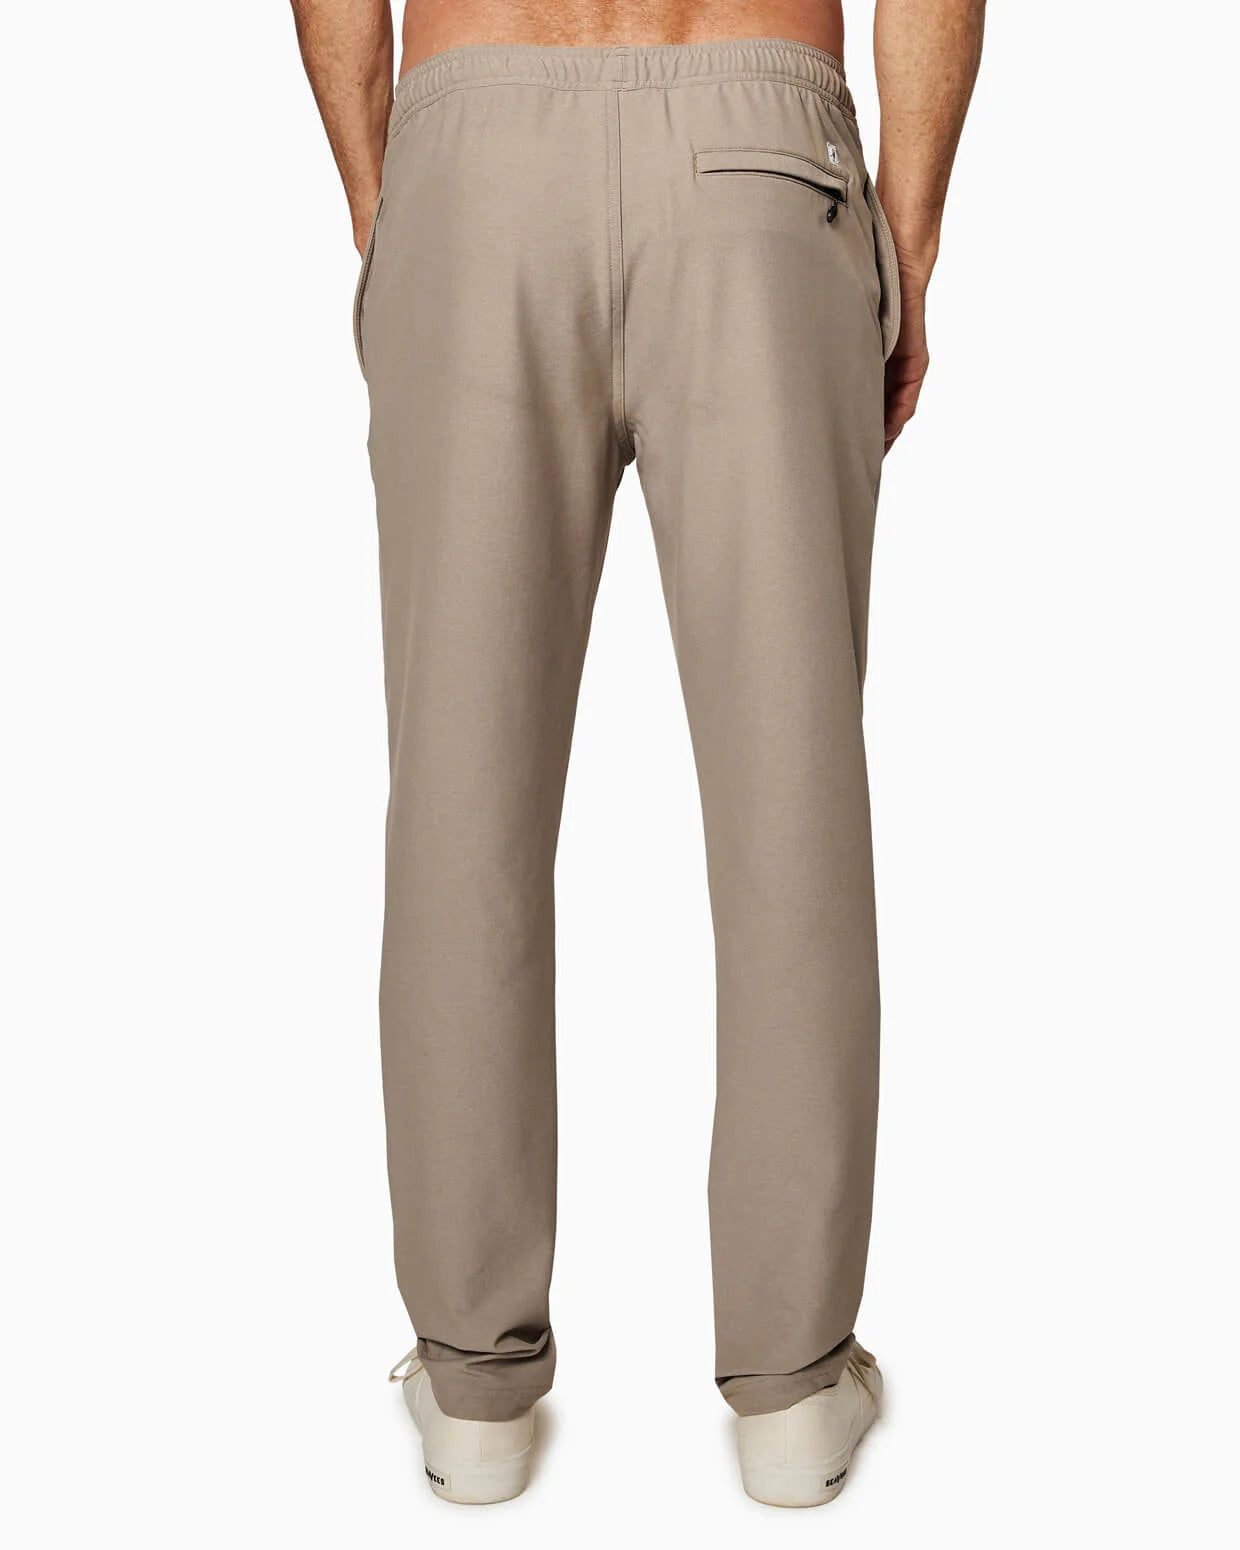 Men's Toes on the Nose Cojo Elastic Waist Pant